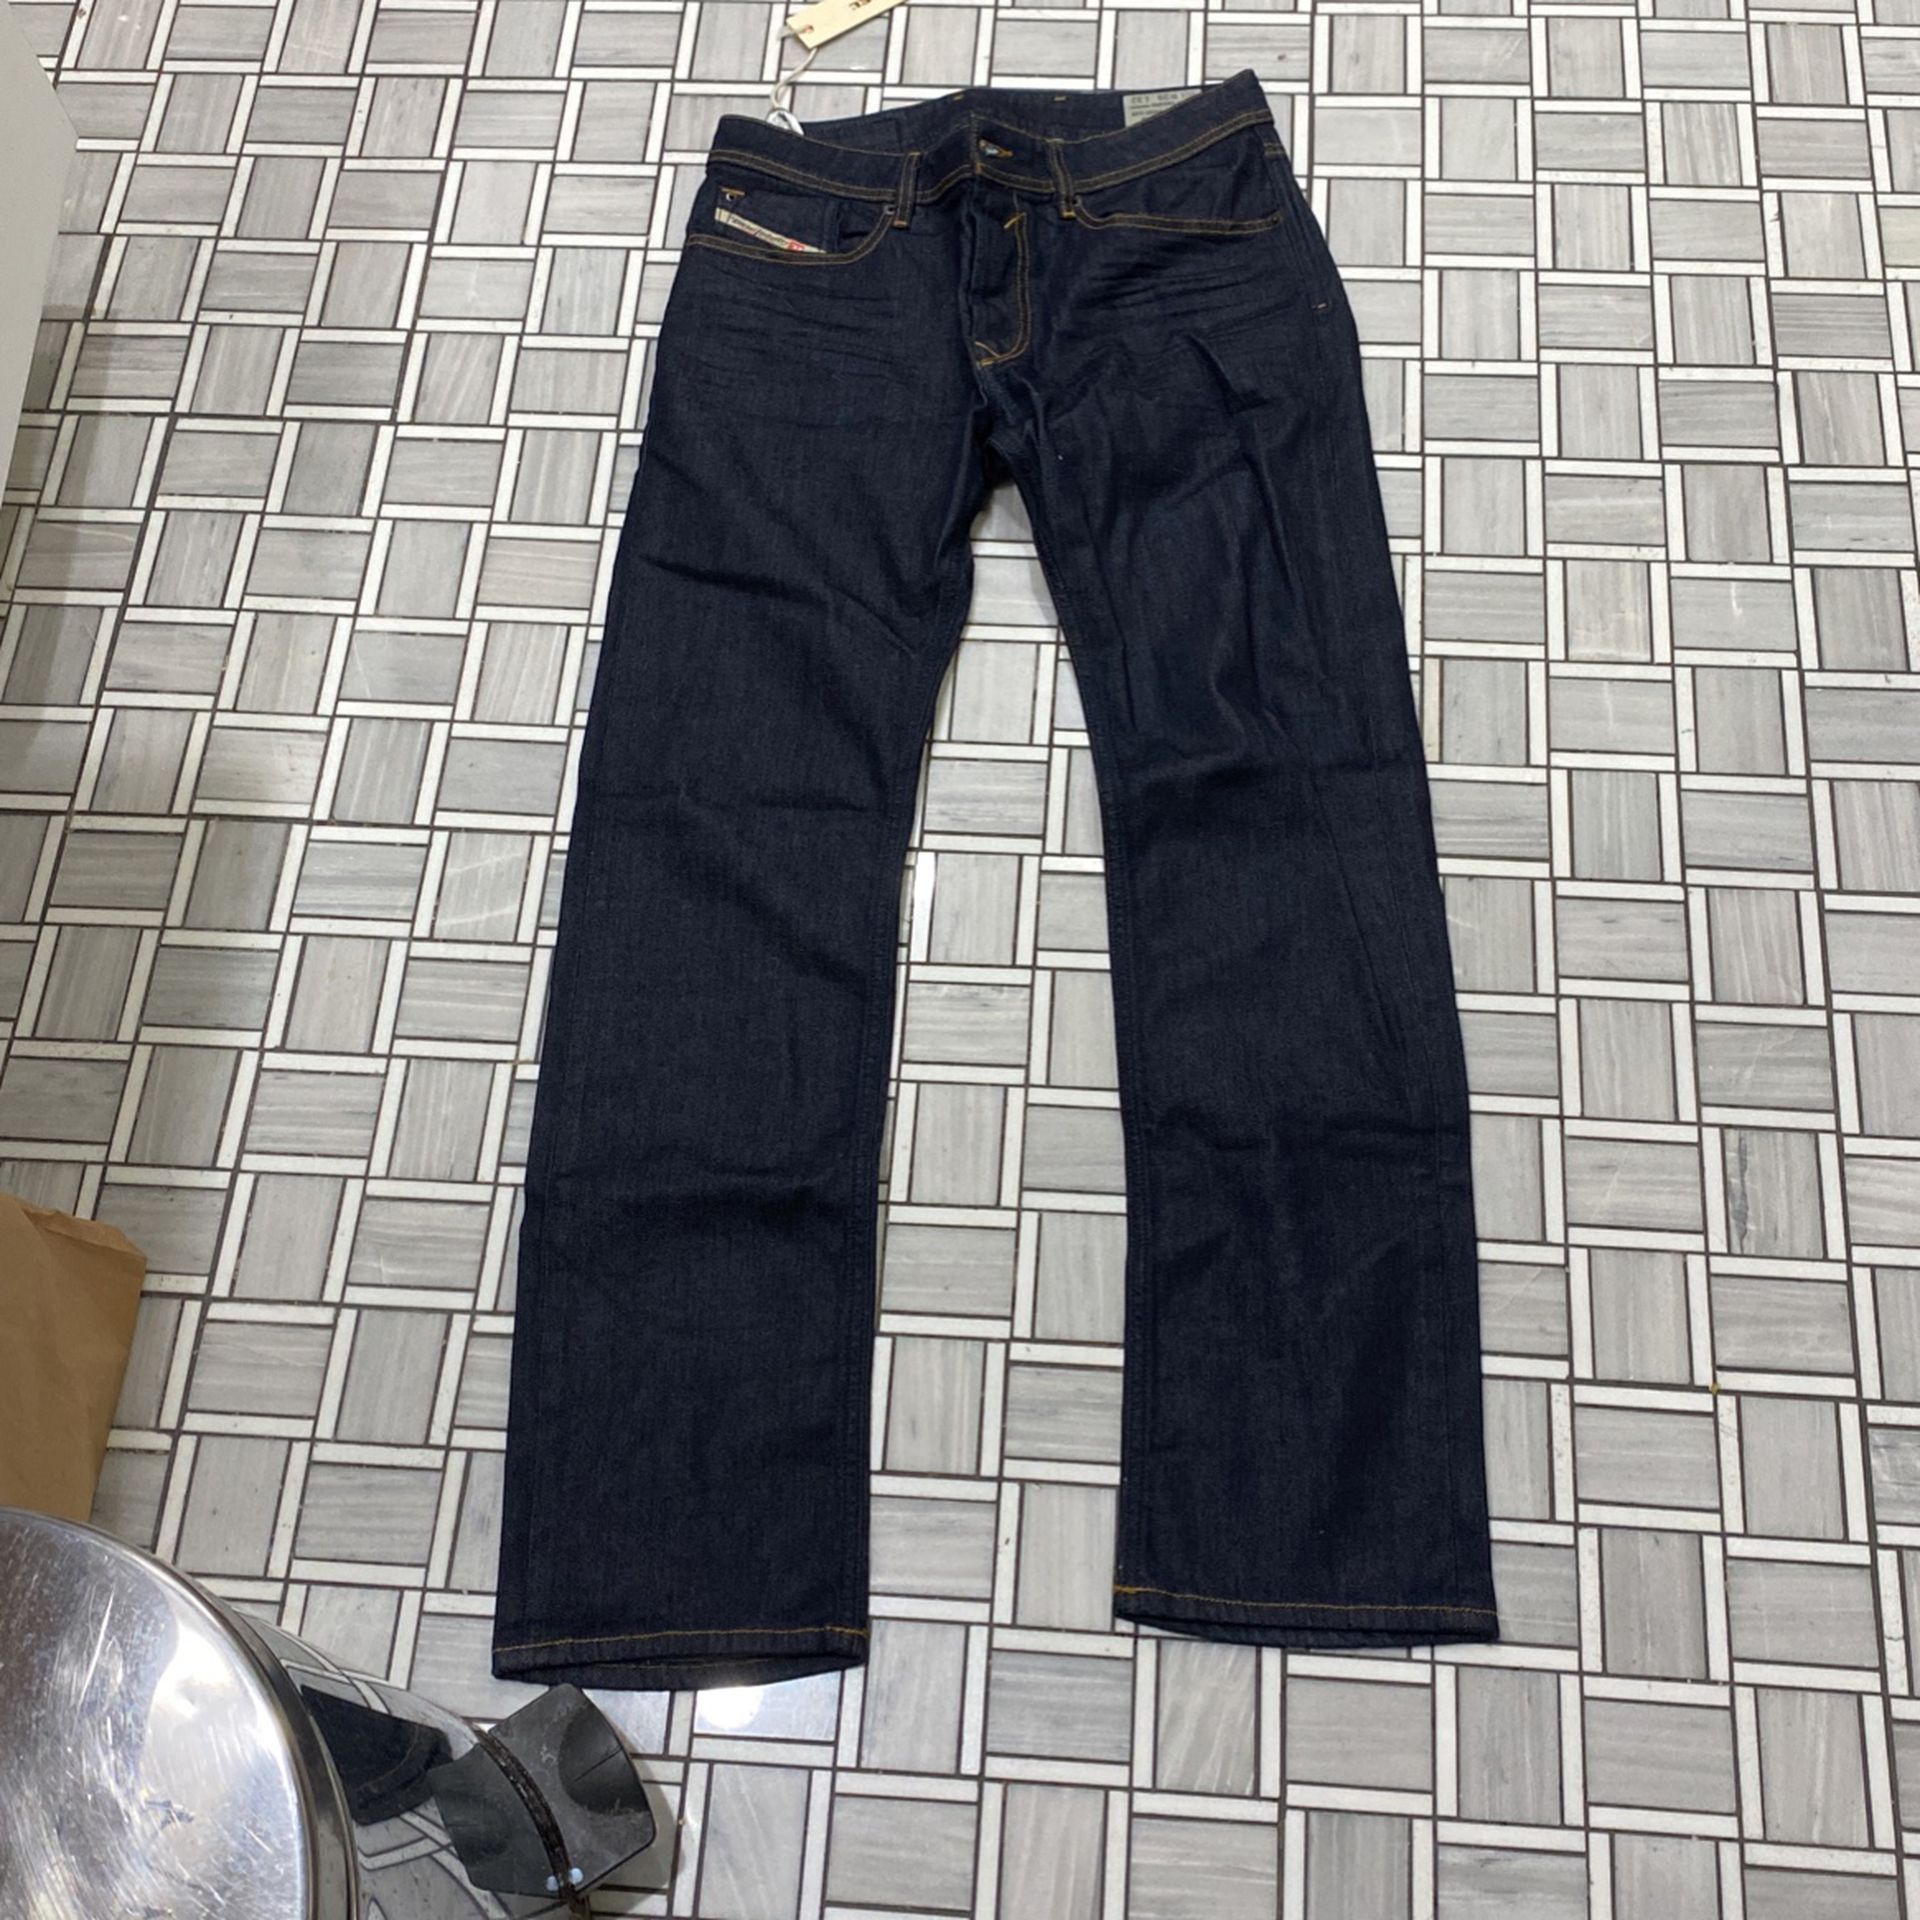 maagd Instrument massa *Brand New With Tags* Diesel Men's Waykee Jeans W29 L33 for Sale in Queens,  NY - OfferUp